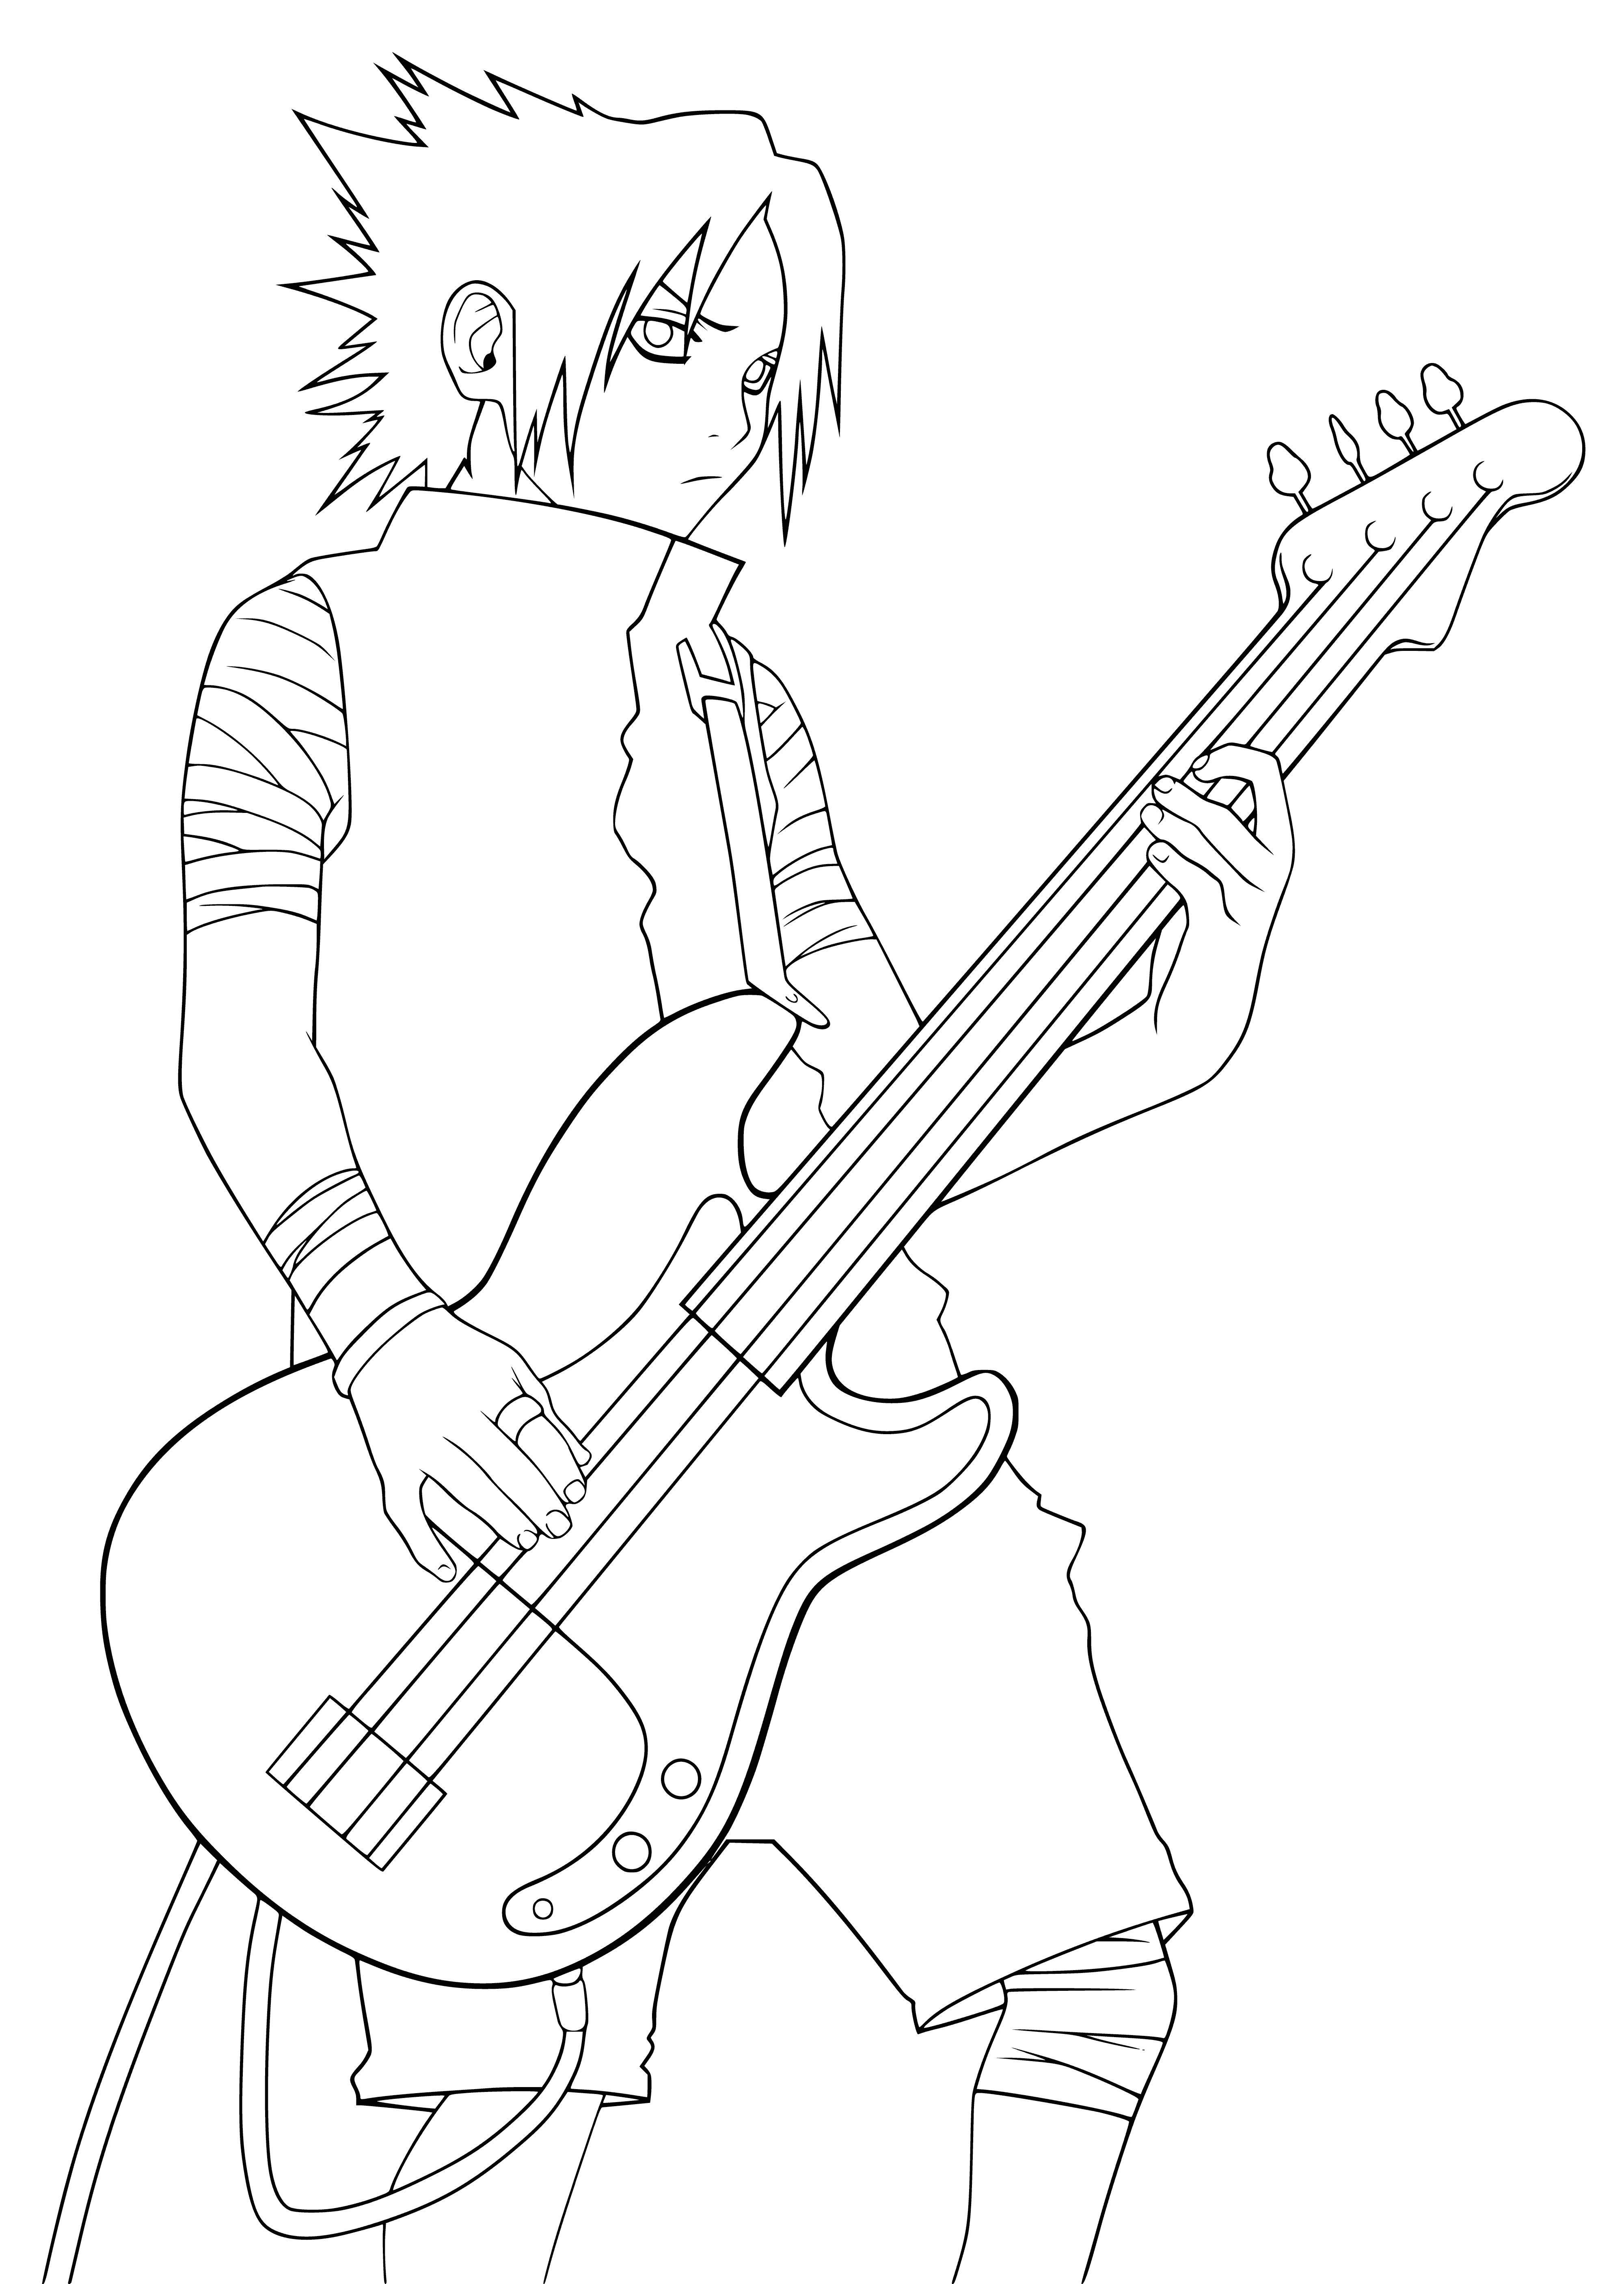 coloring page: Sasuke is a handsome, muscular shinobi who is skilled in medical ninjutsu, used to patch up his teammates and villagers.